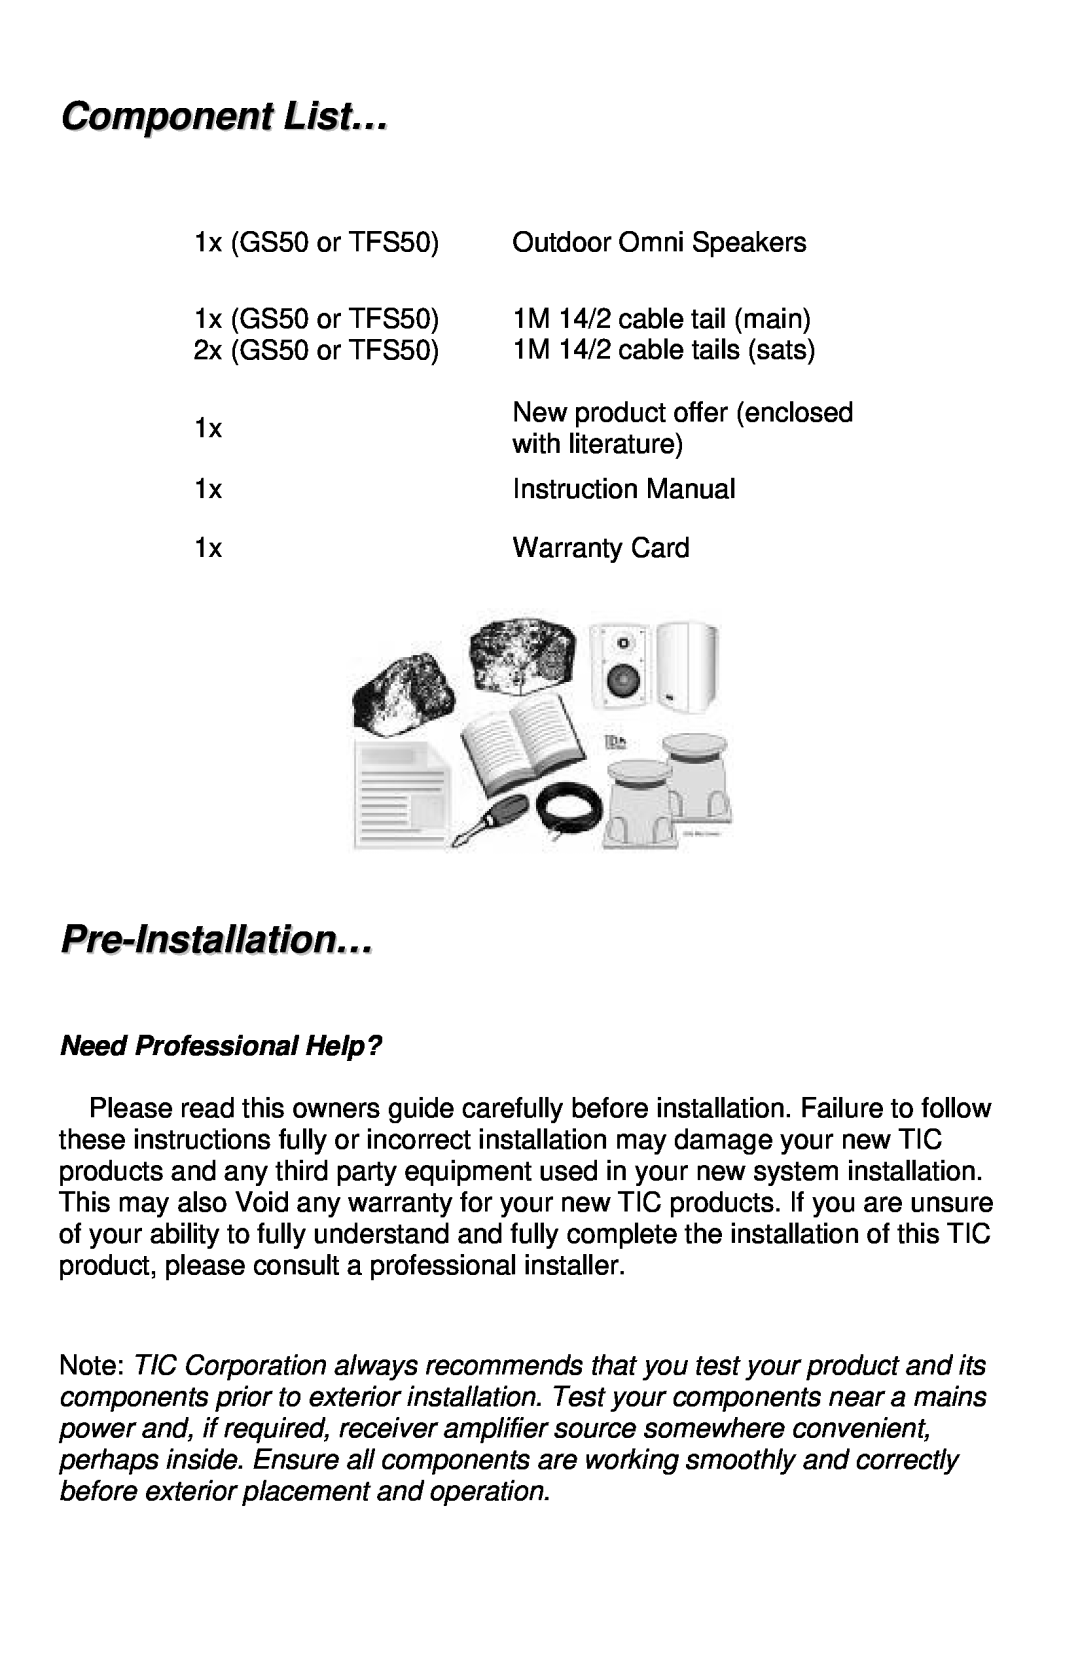 TIC TFS50, GS50 manual Component List…, Pre-Installation…, Need Professional Help? 